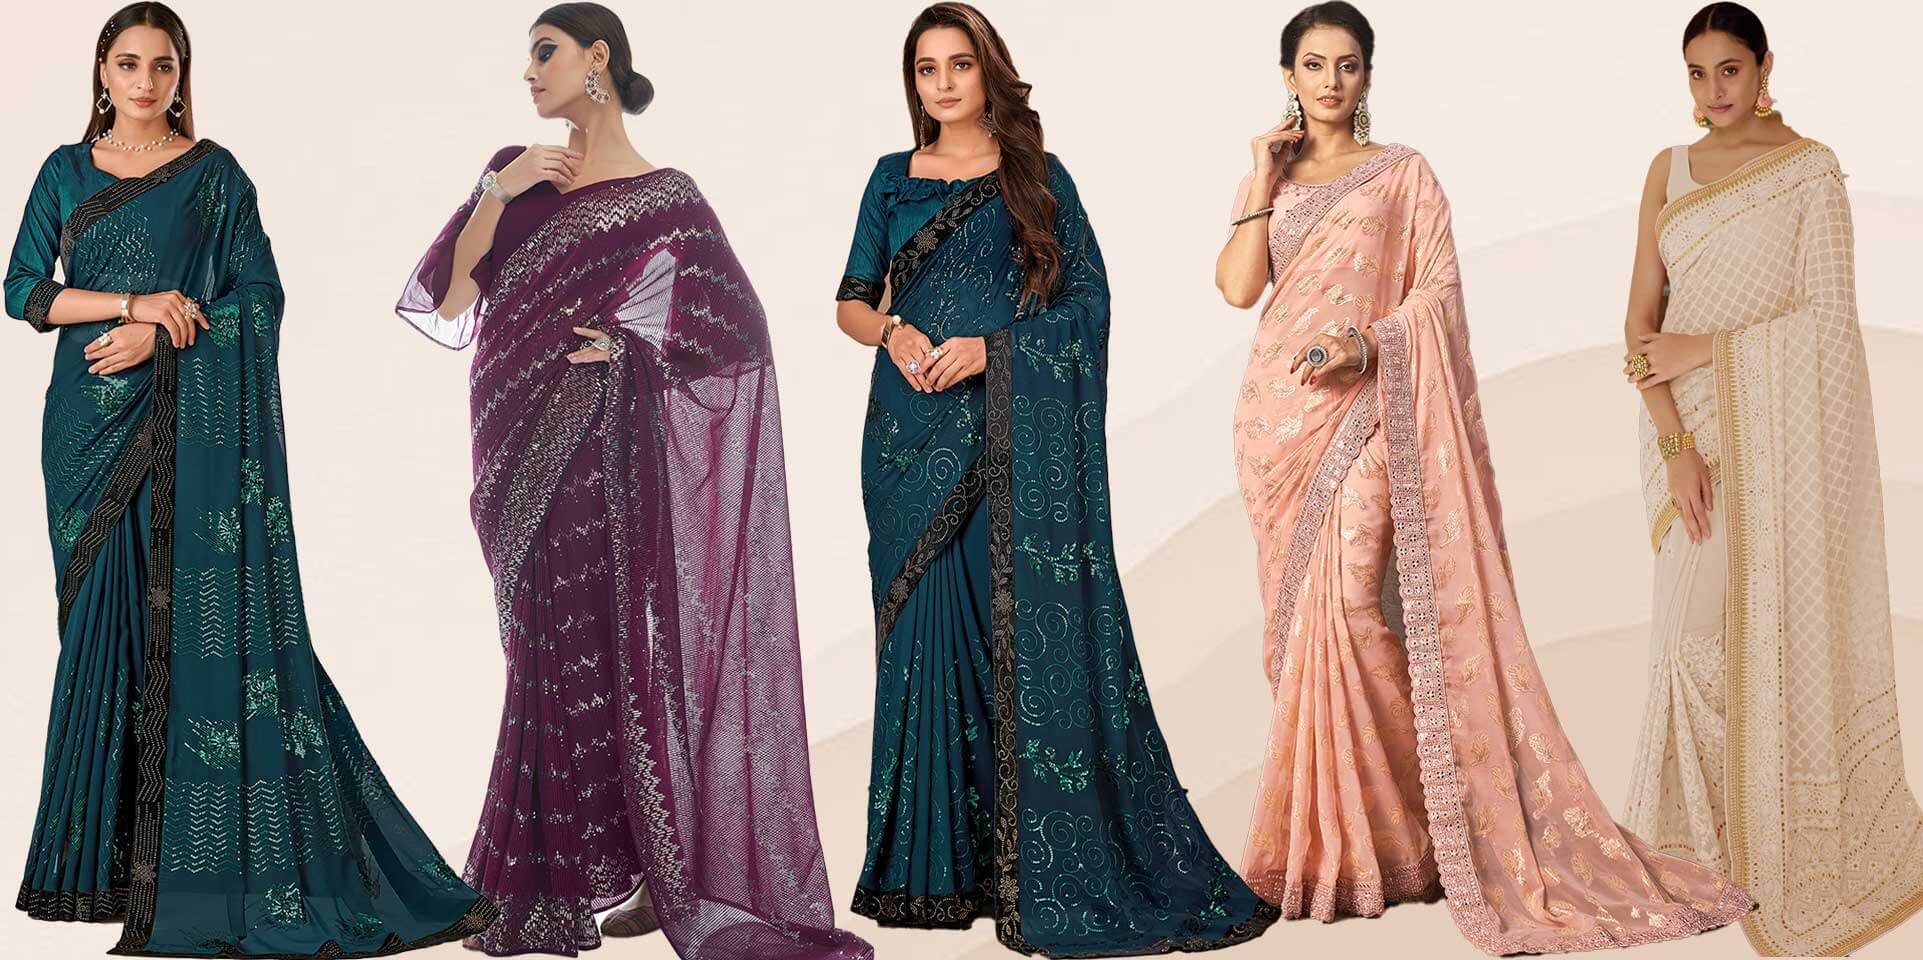 21 Regional Sarees of India You Should Have In Your Wardrobe - Latest  Fashion News, New Trends